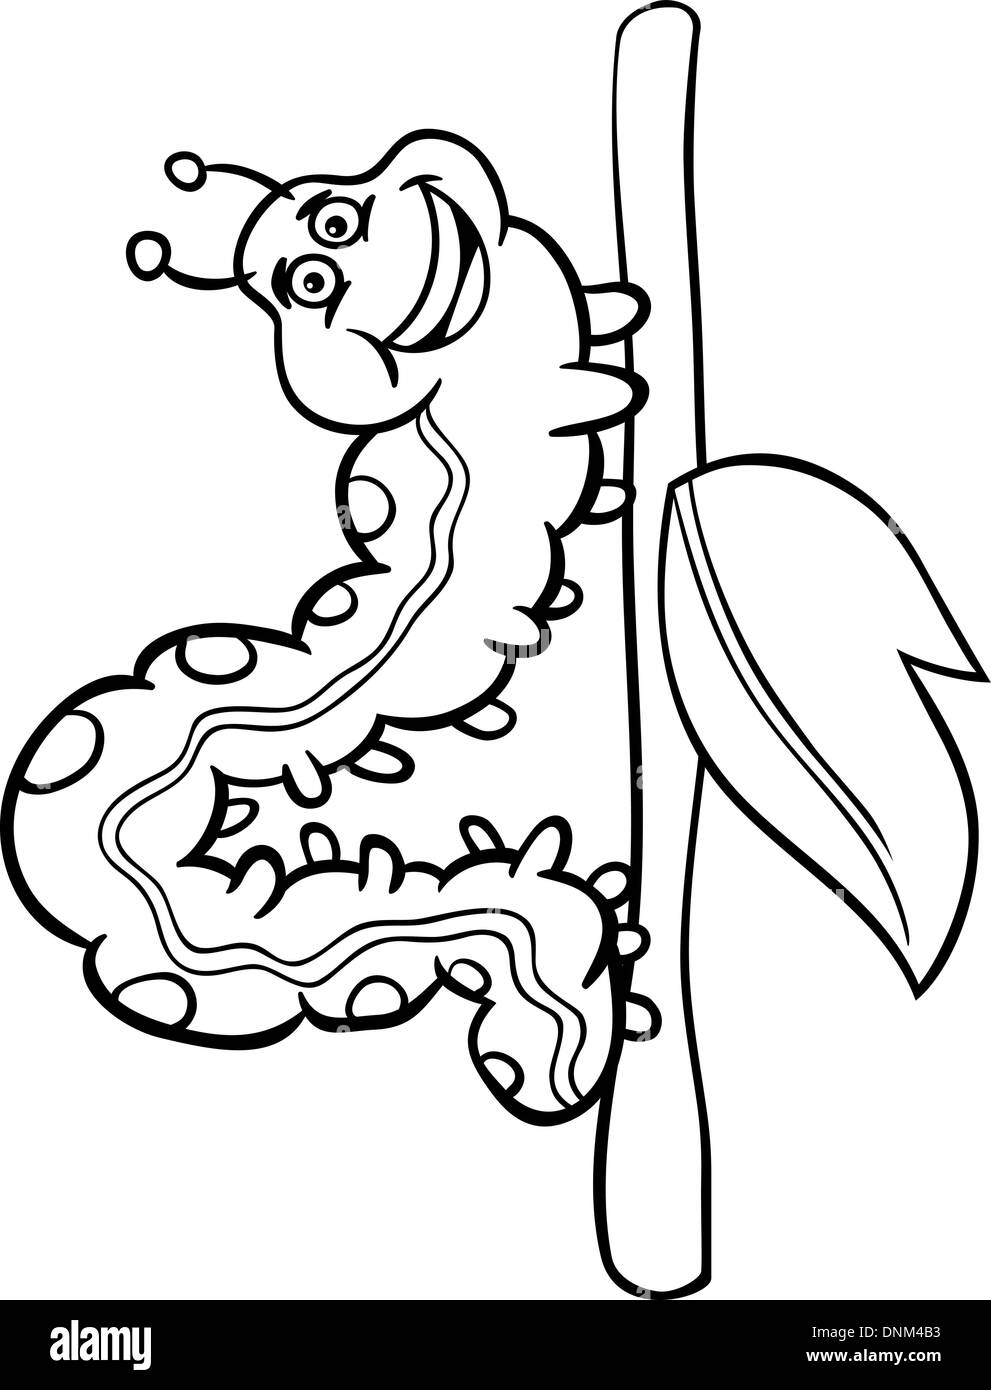 Black and white cartoon illustration of funny caterpillar insect on stick with leaf for coloring book stock vector image art